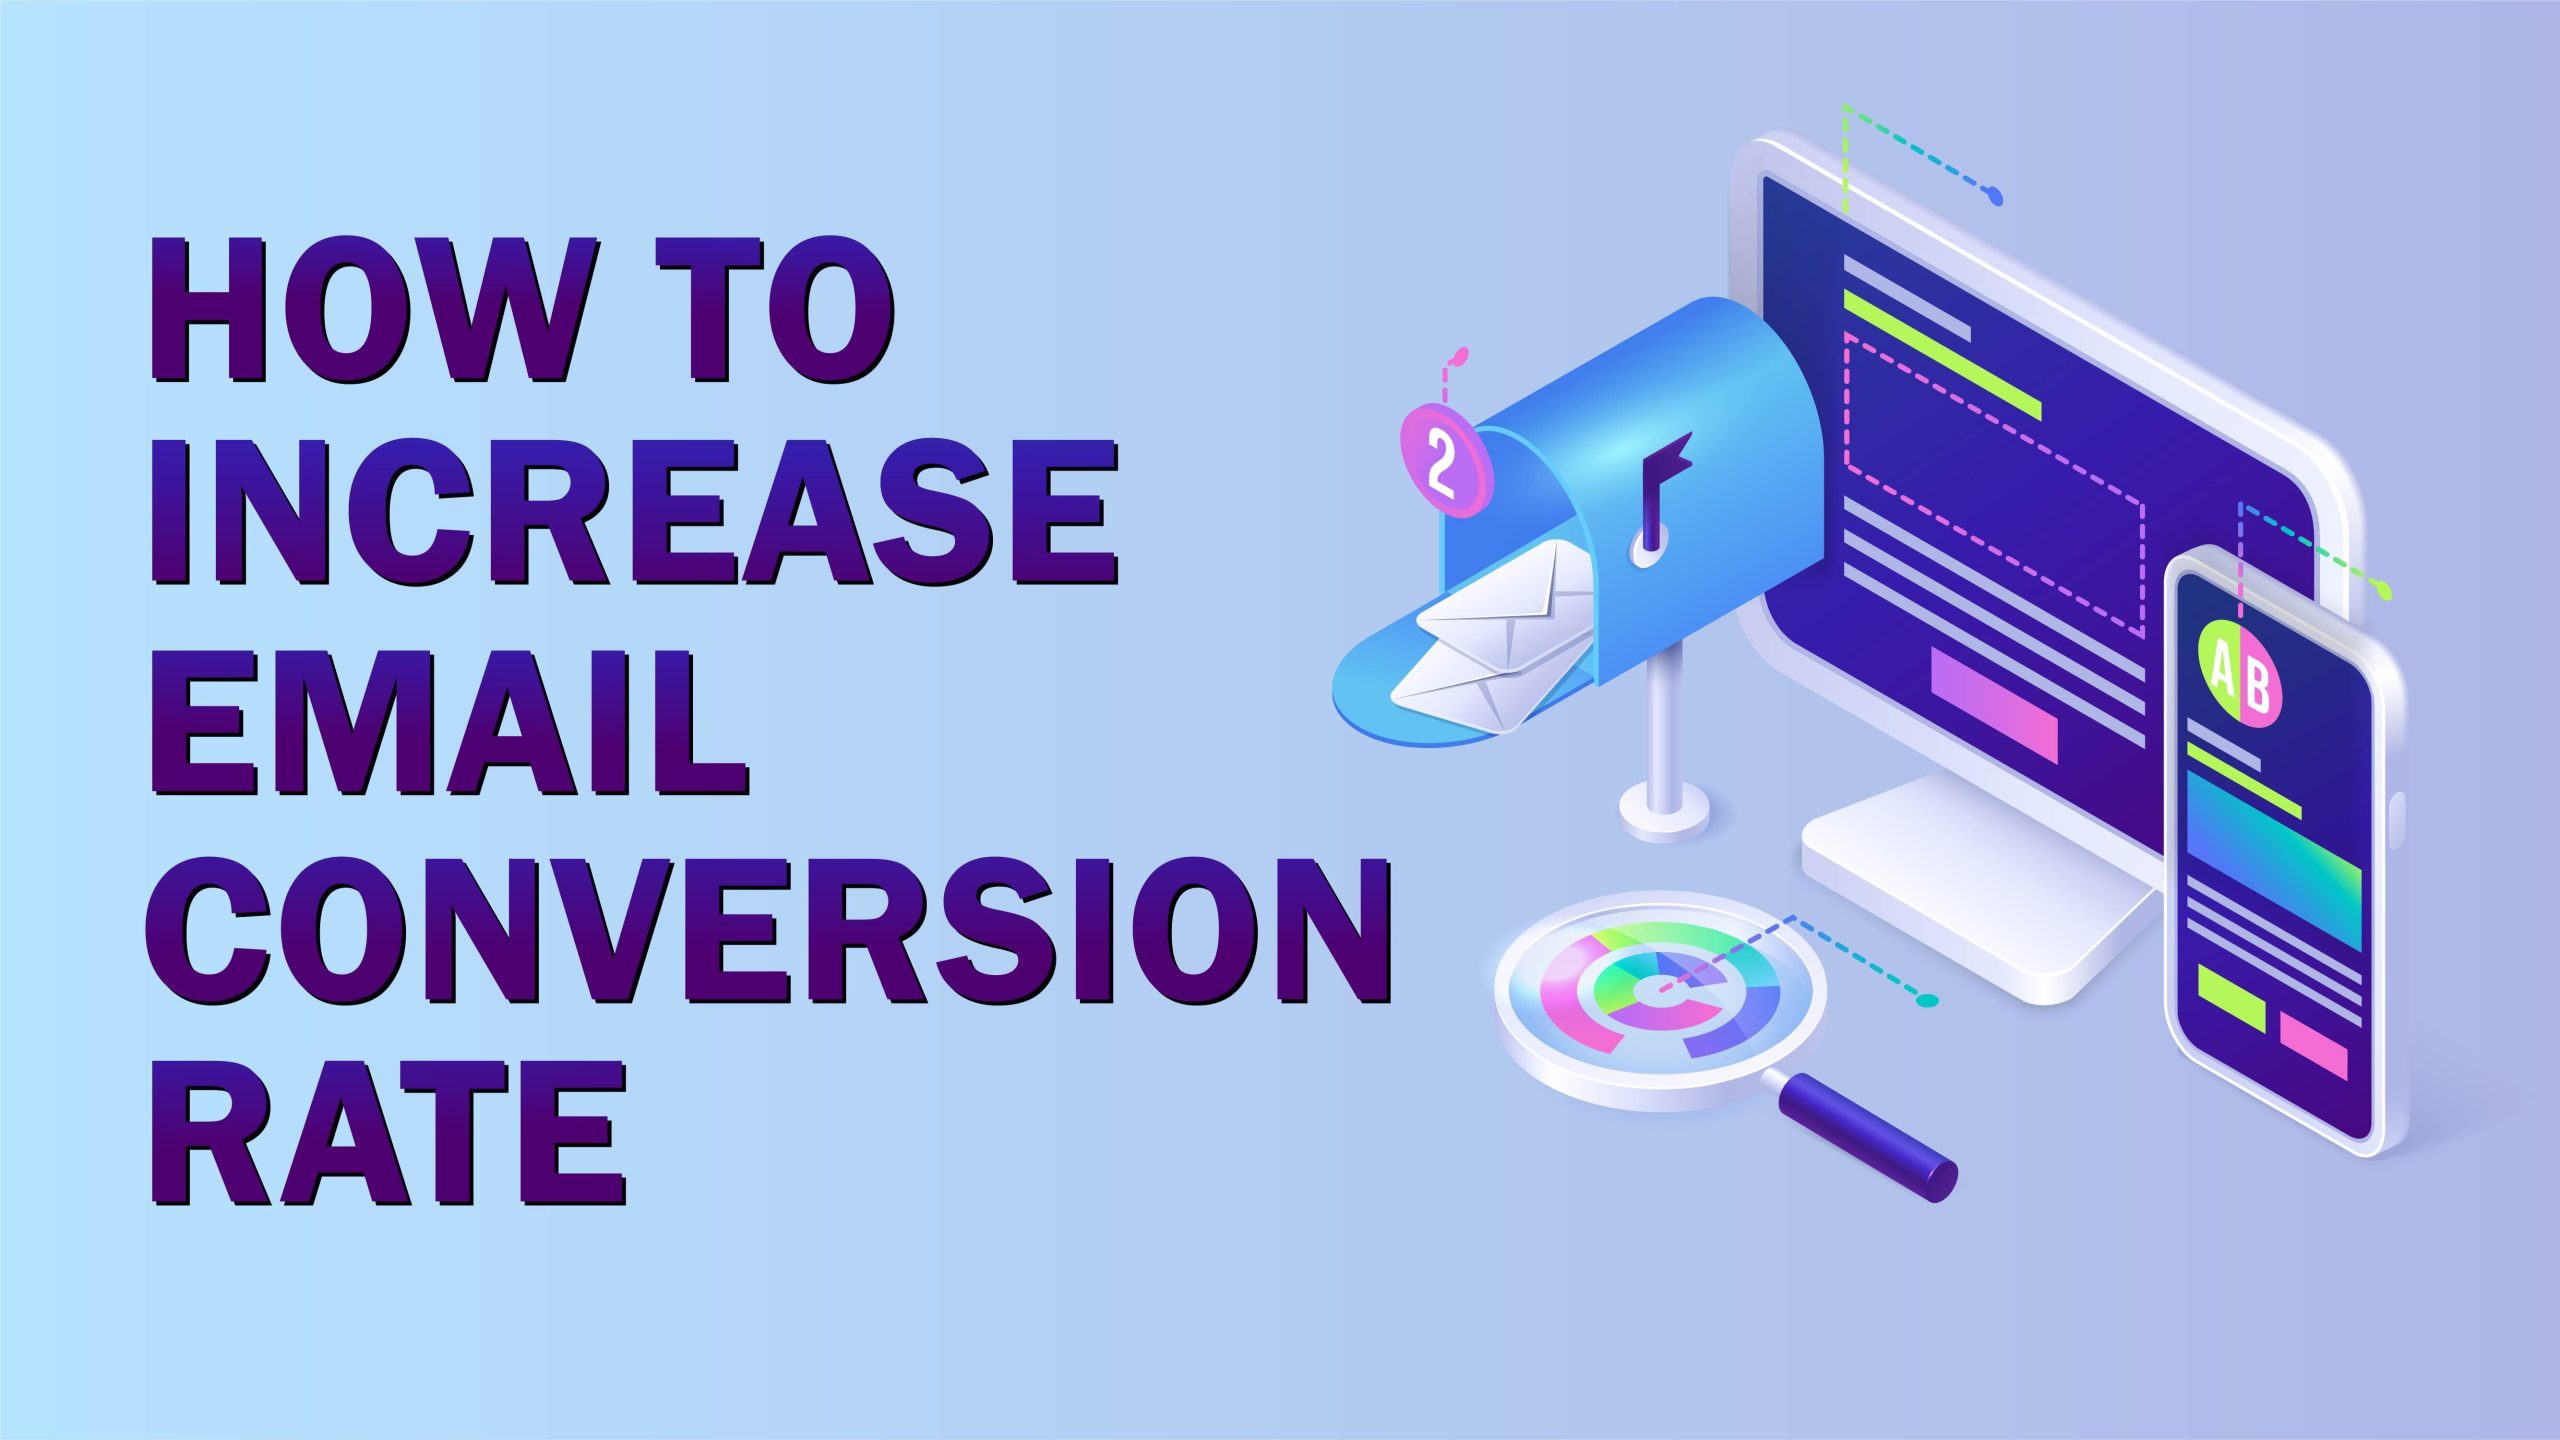 How To Increase Email Conversion Rate